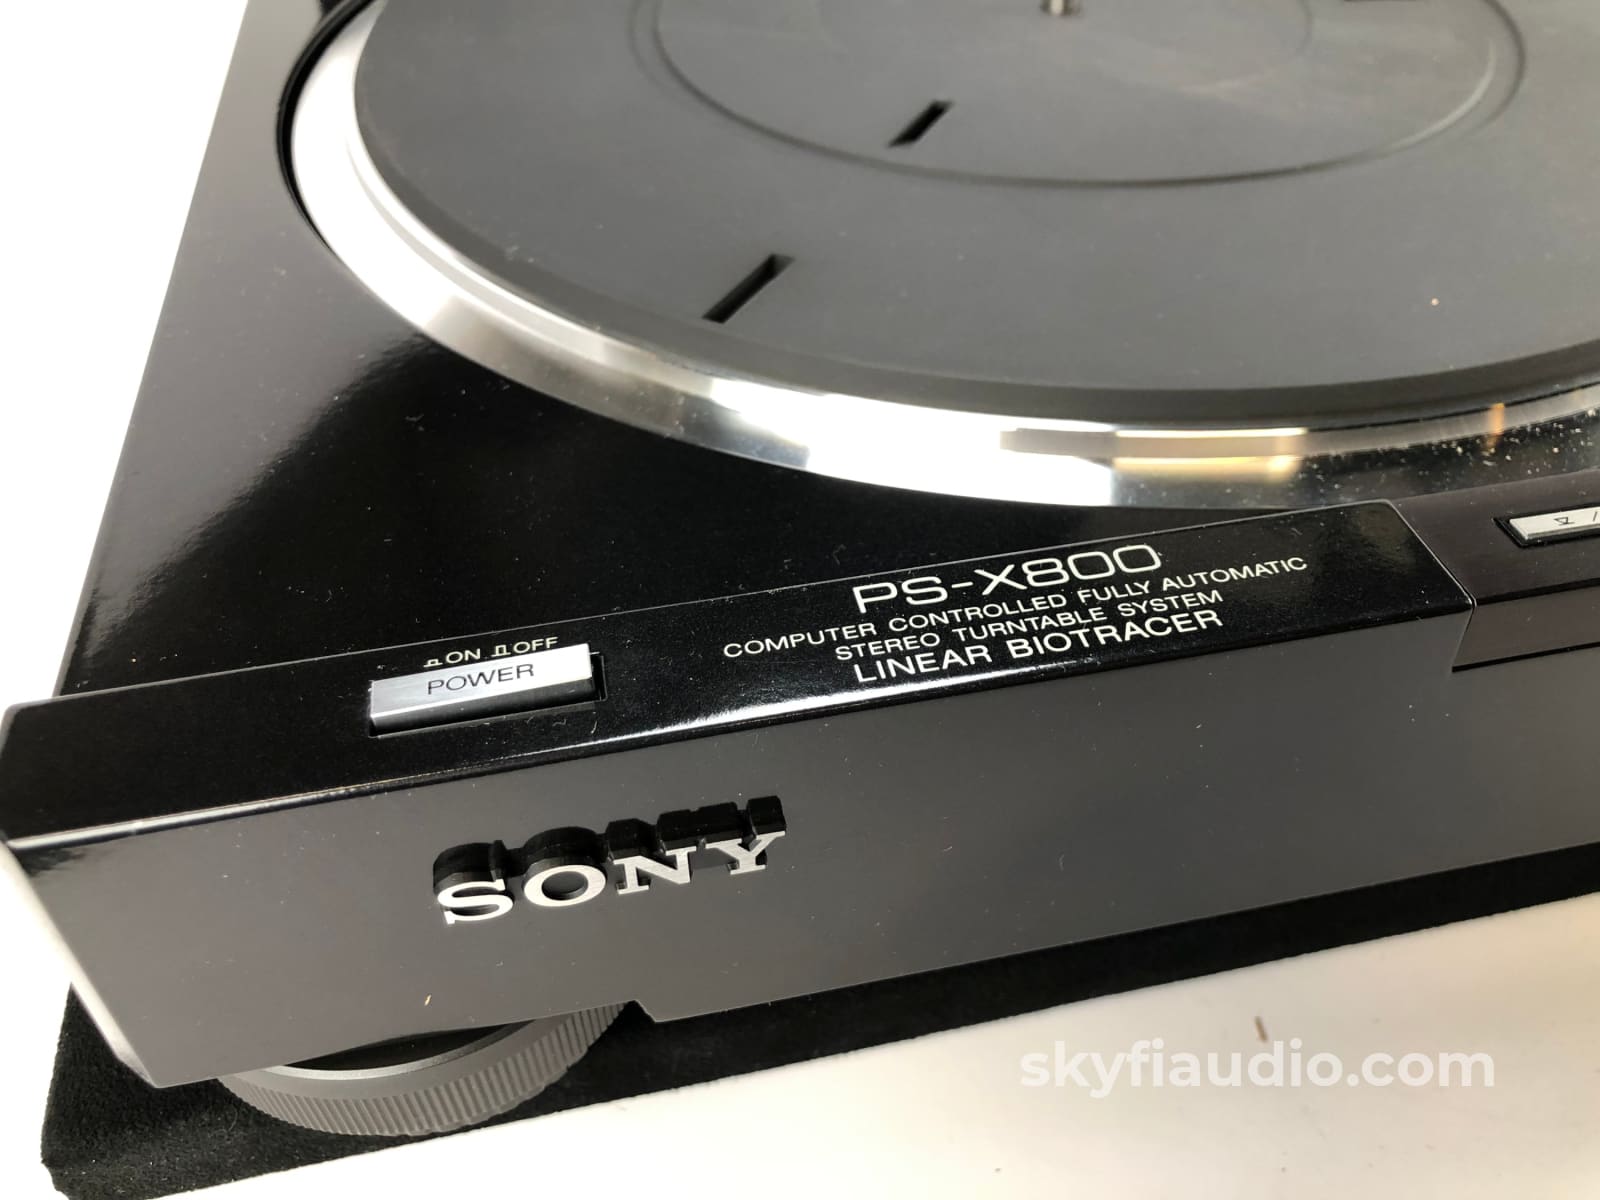 Sony Ps-X800 Linear Tracking Turntable - Like New In Box!